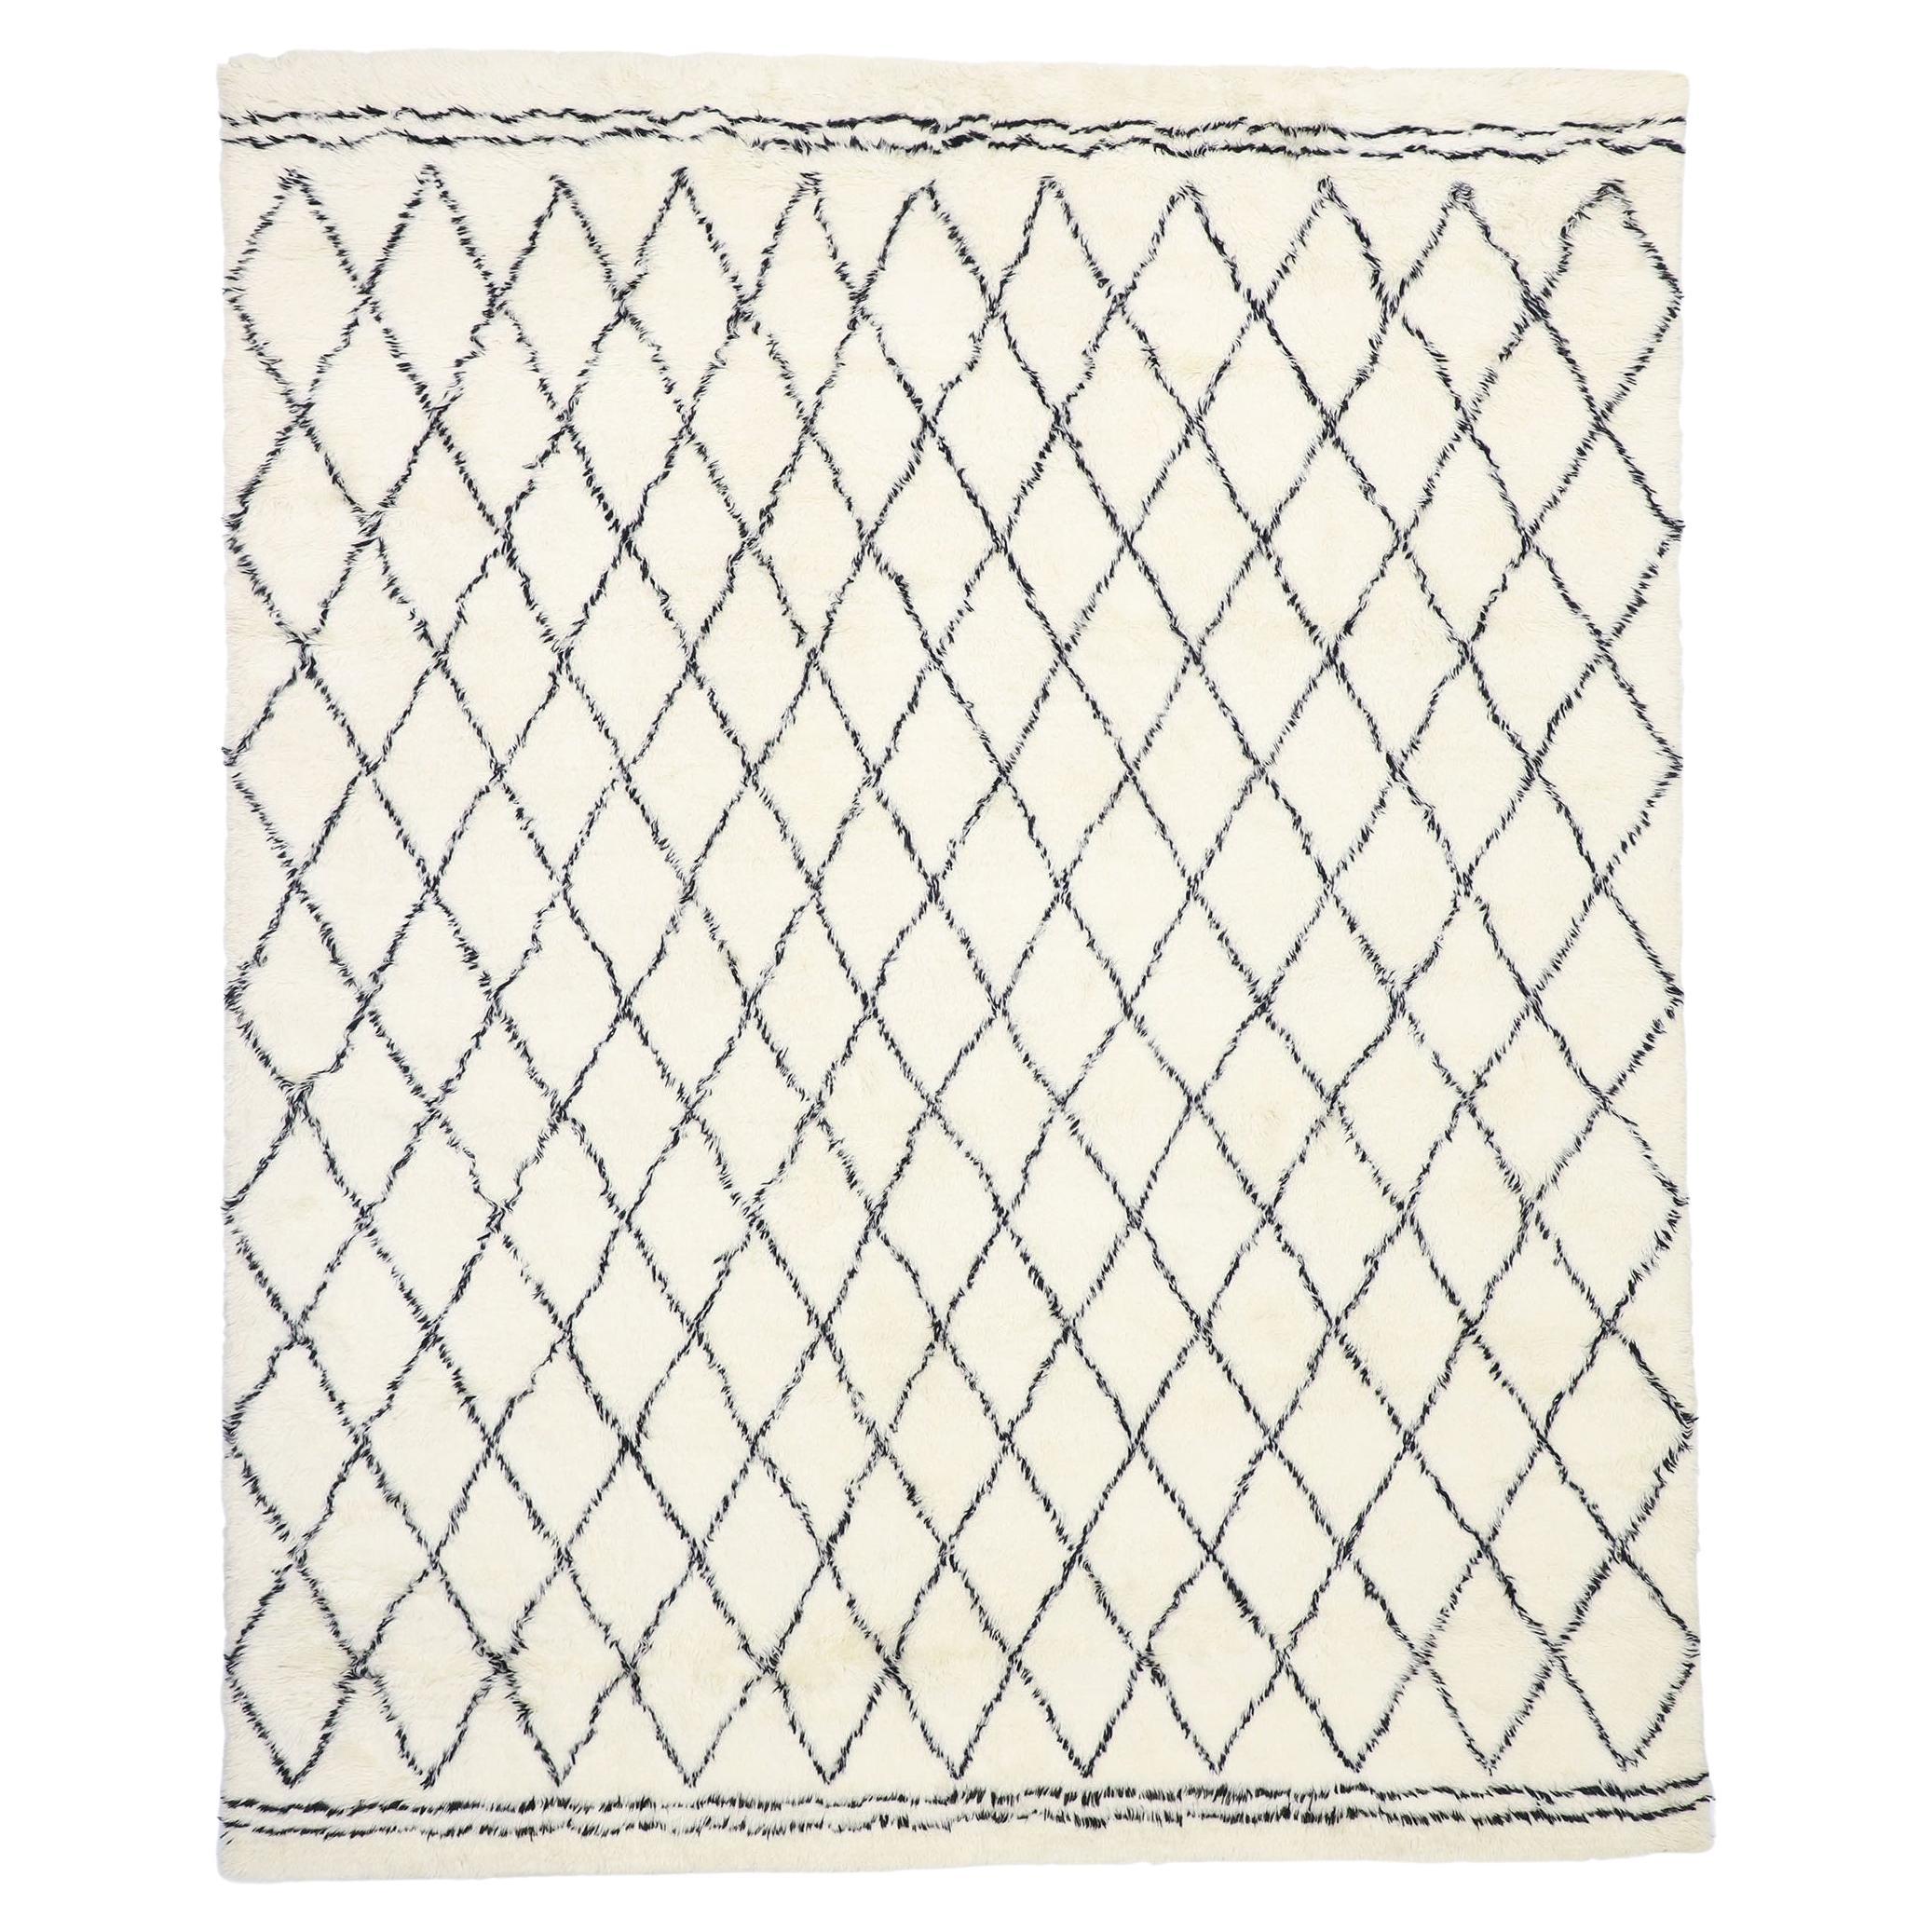 Modern Moroccan Rug, Cozy Cohesiveness Meets Soft and Subtle